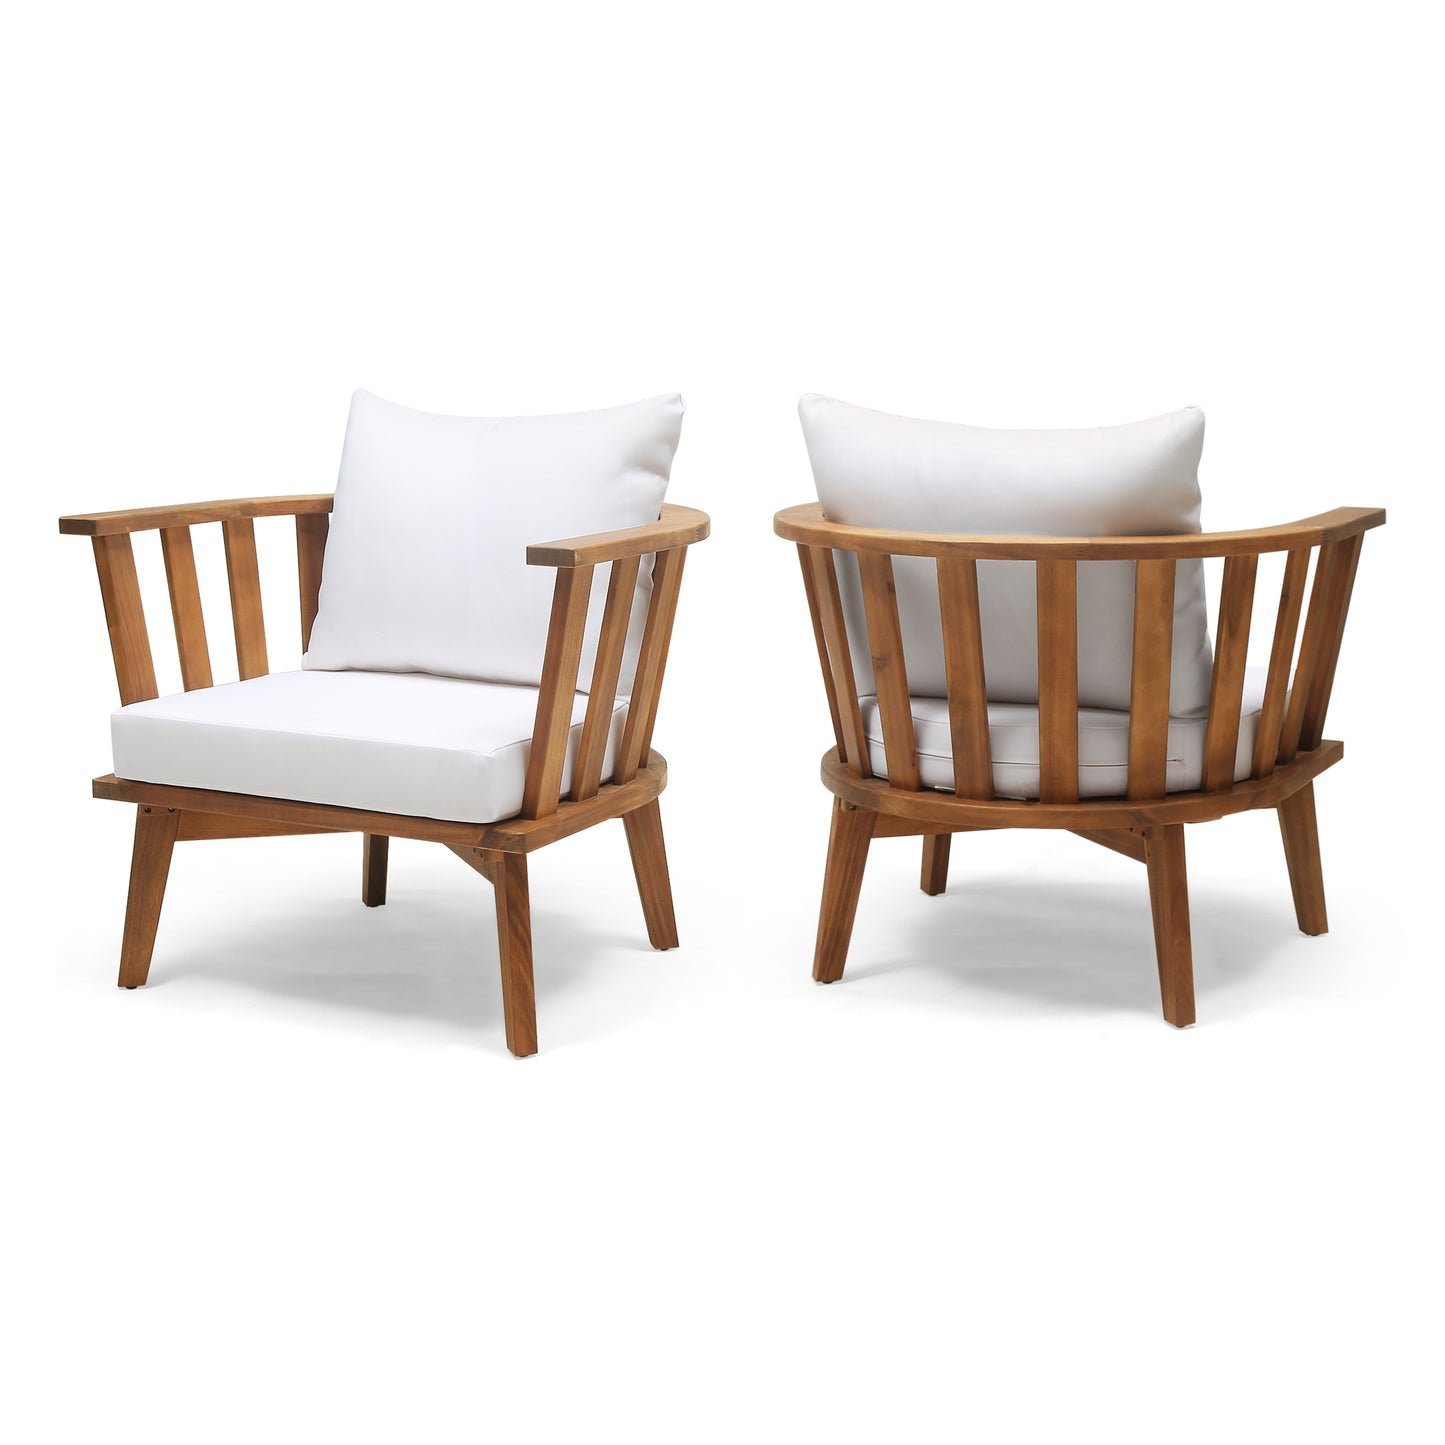 Dean Outdoor Wooden Club Chair with Cushions (Set of 2), White and Teak Finish